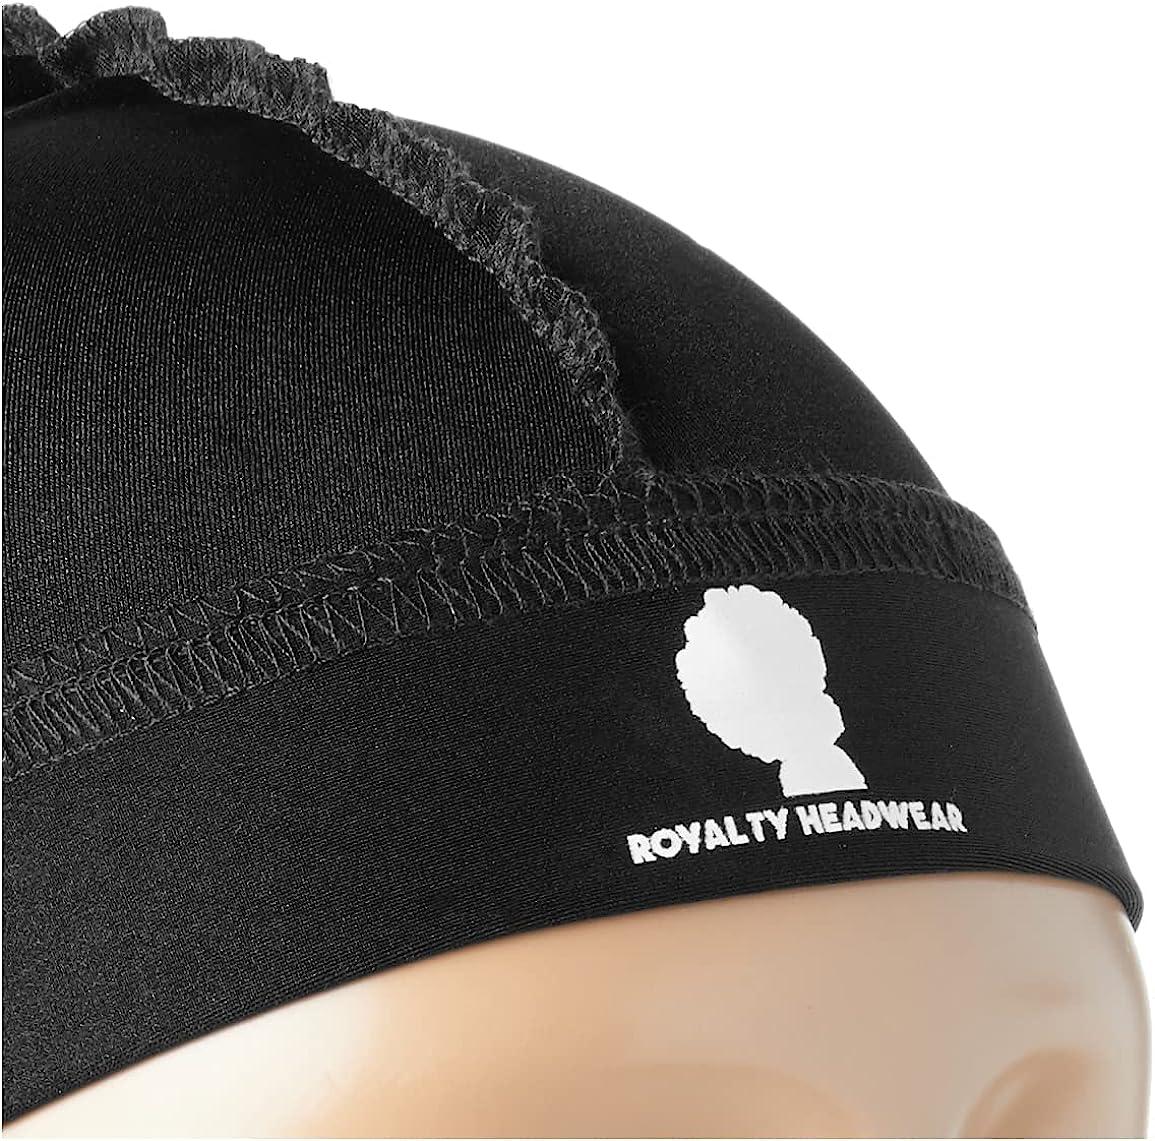  Royalty Headwear Premium Wave Cap, The Best Wave Cap for for  360, 540, and 720 Waves (Black) : Clothing, Shoes & Jewelry